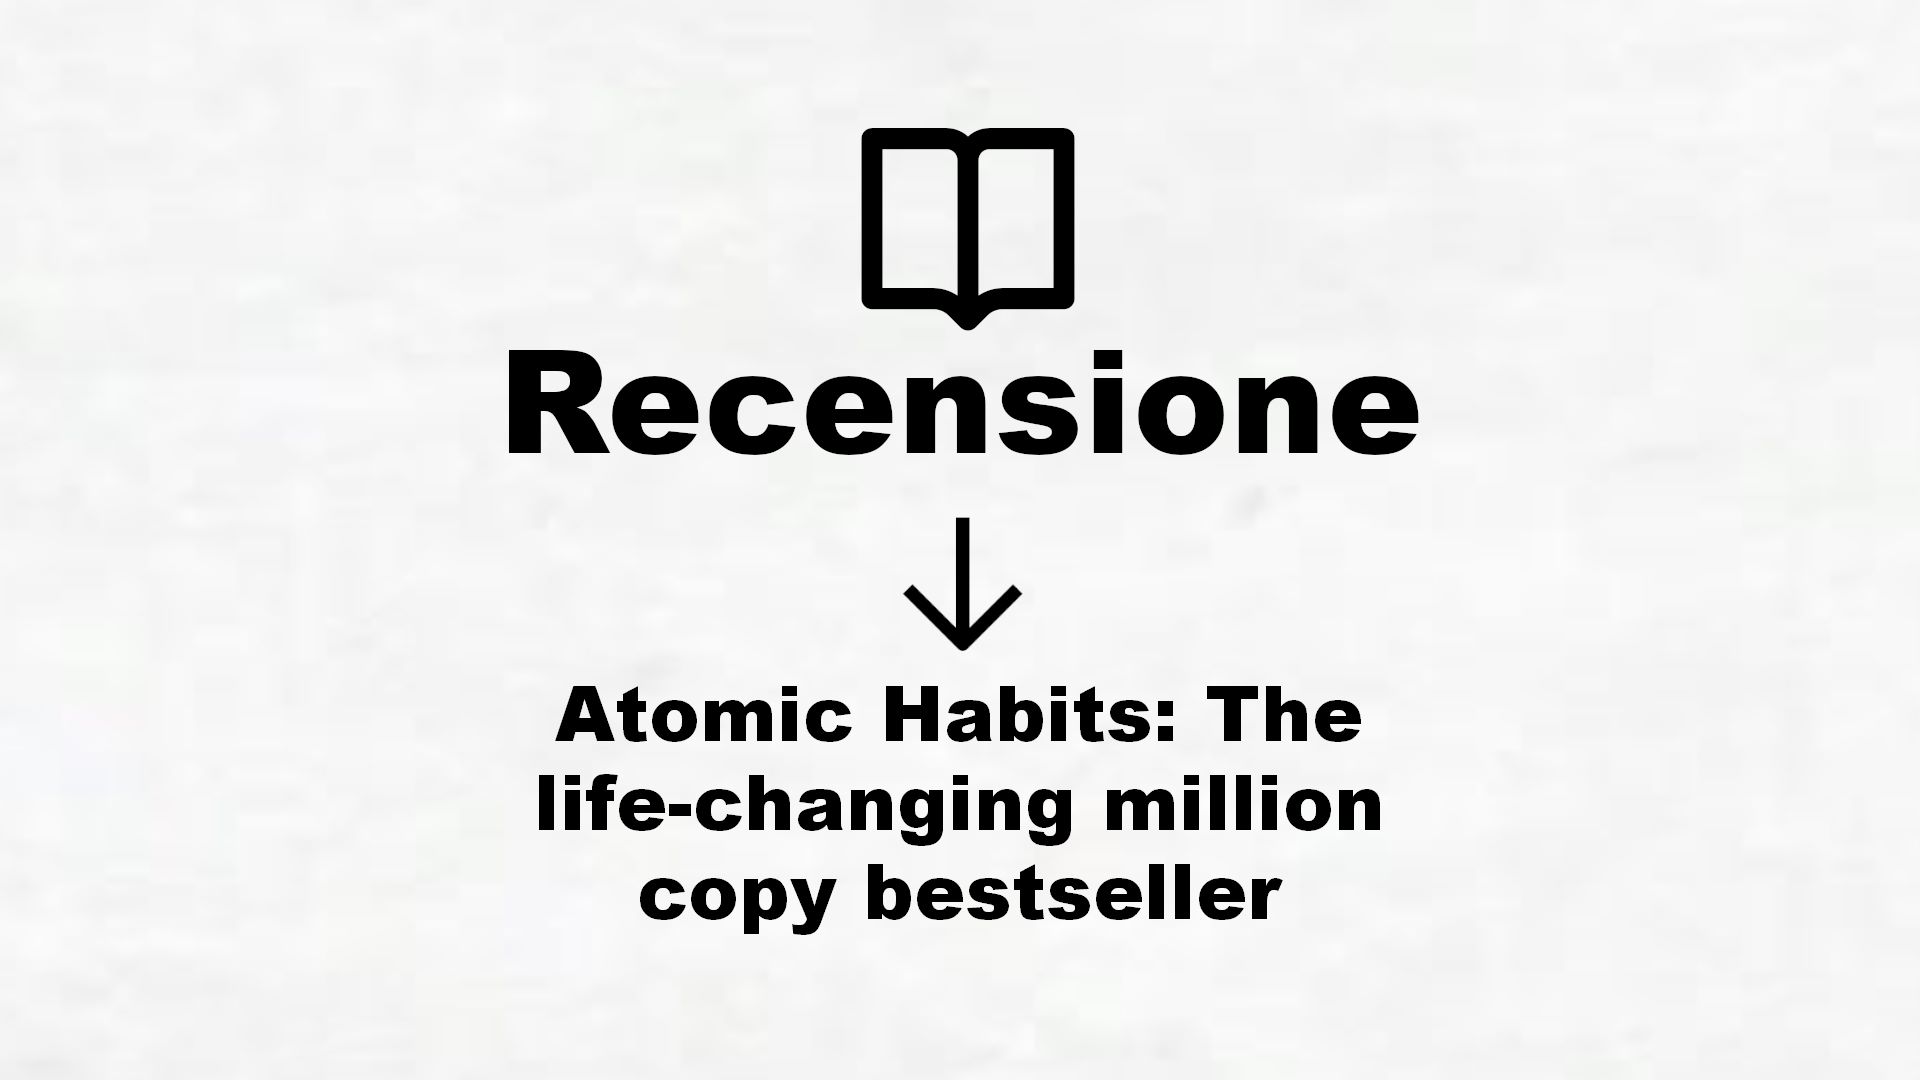 Atomic Habits: The life-changing million copy bestseller – Recensione Libro